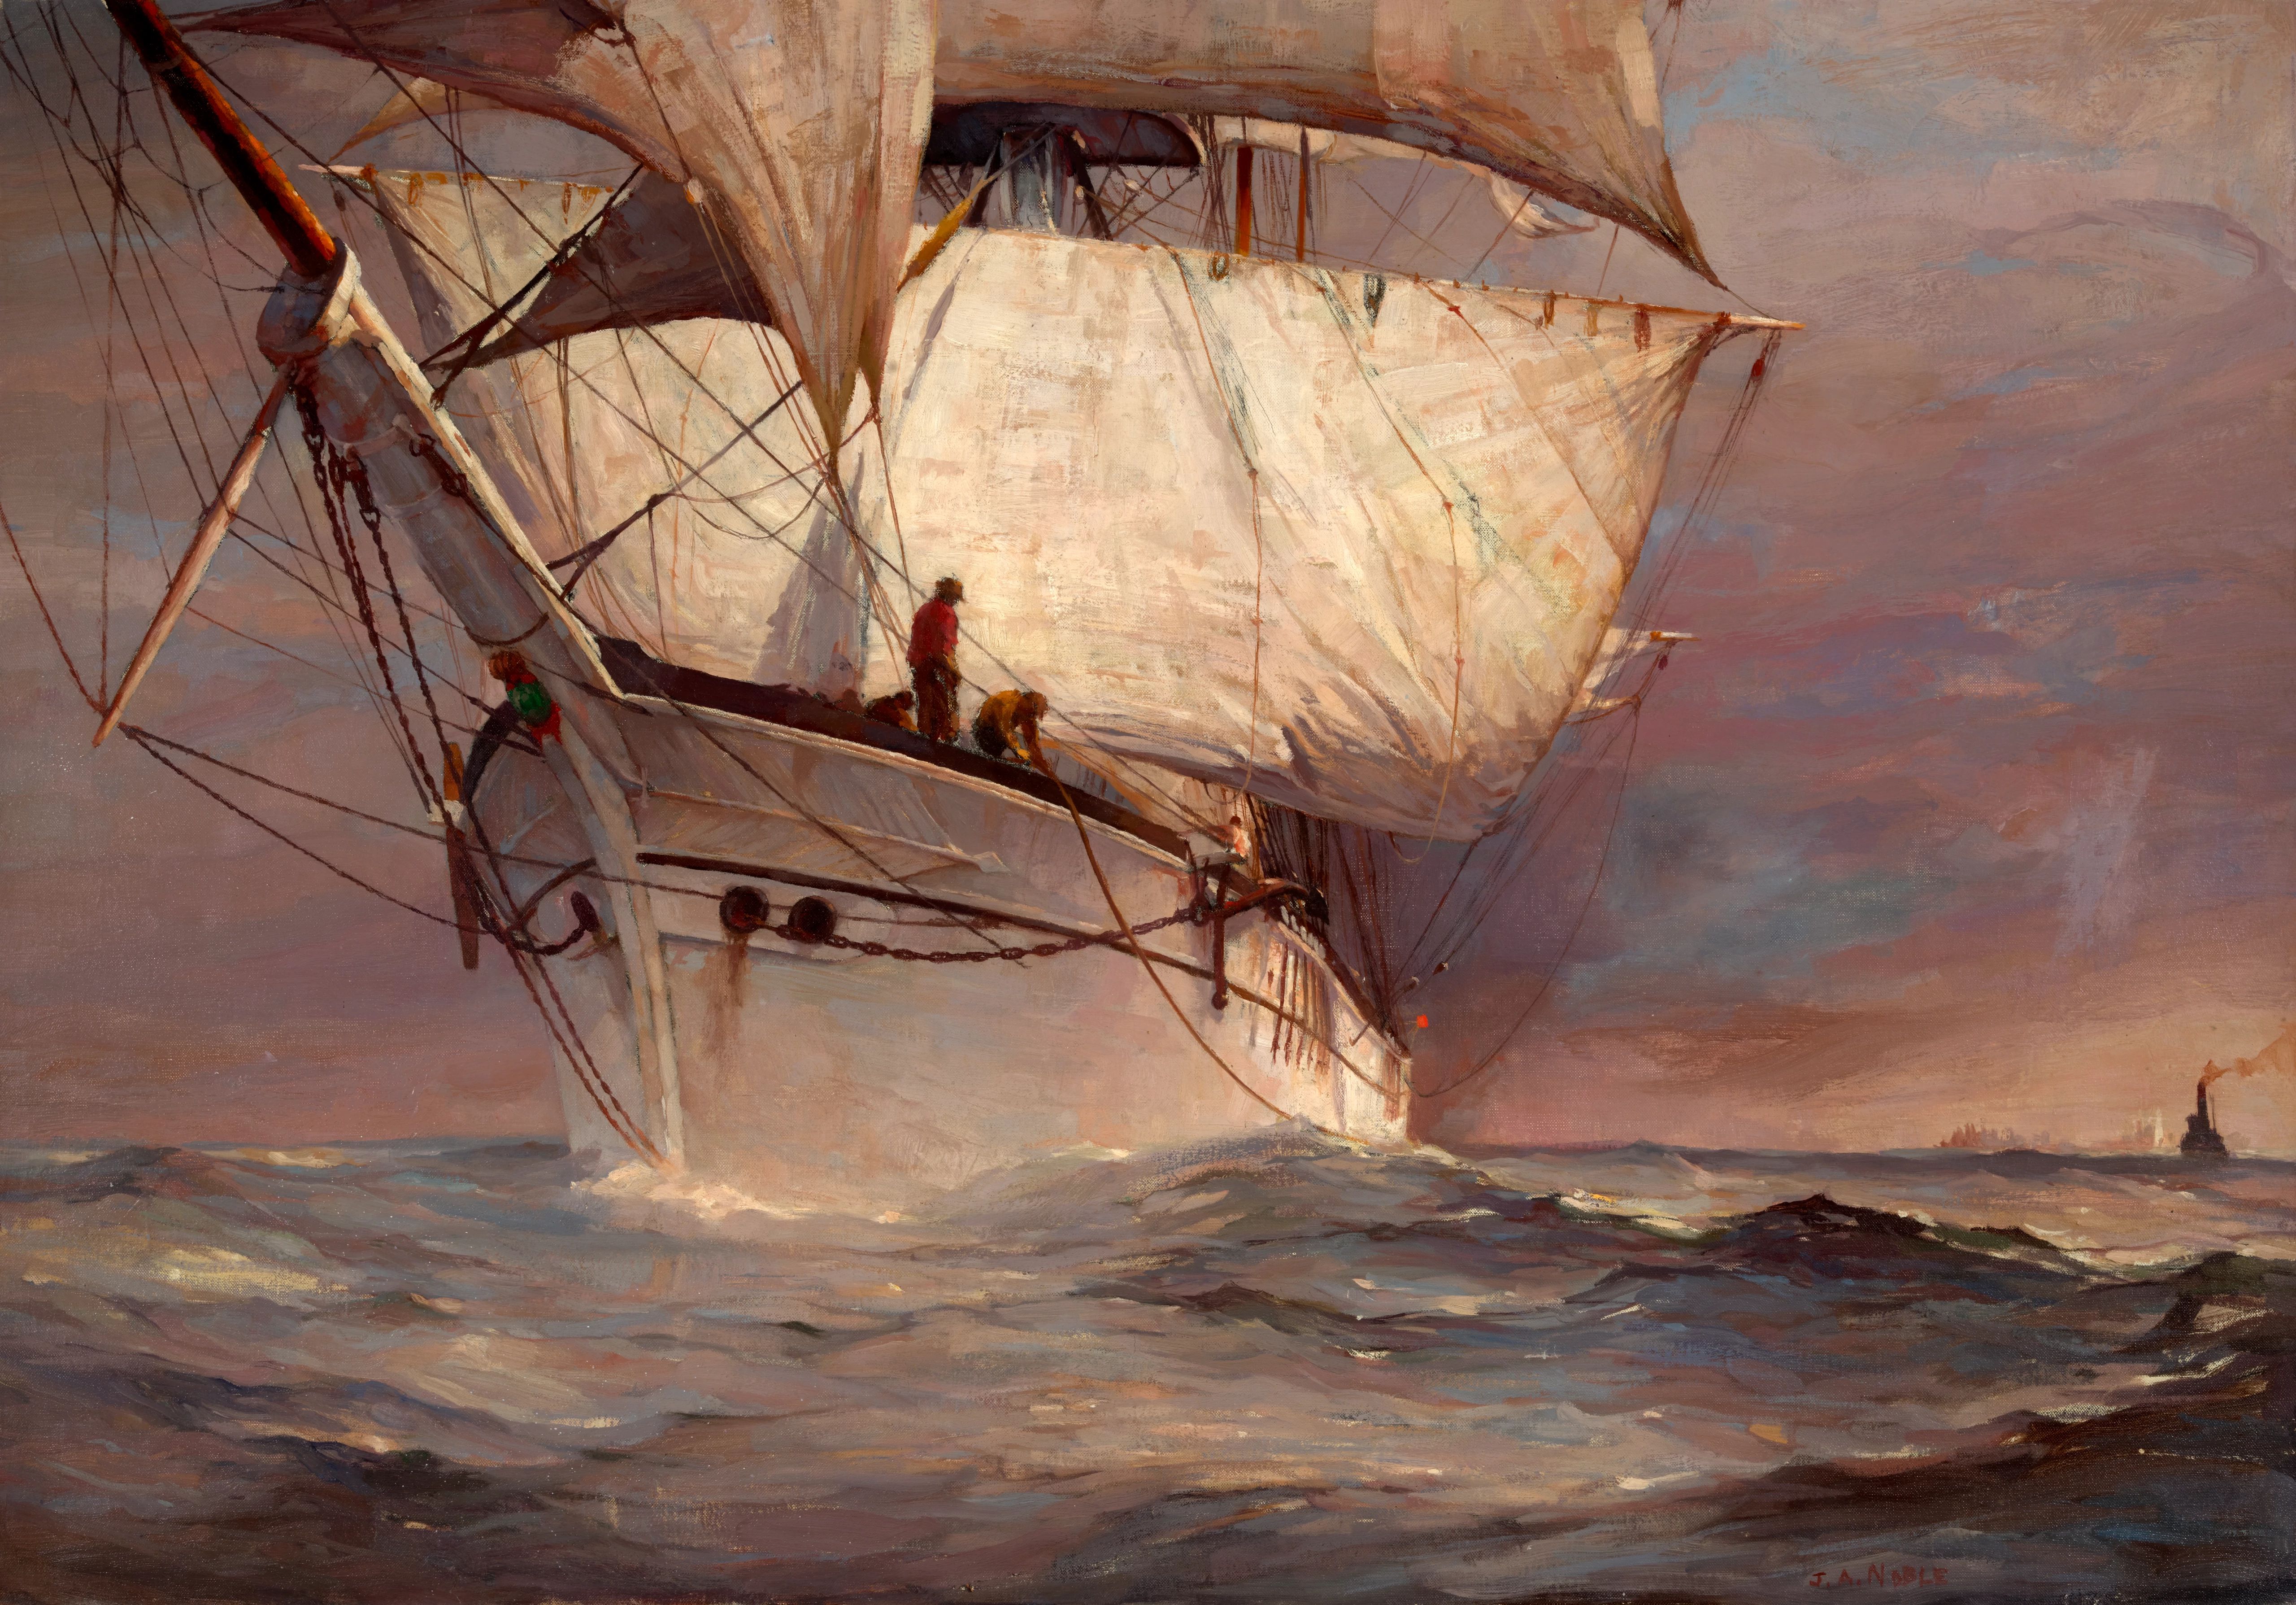 Guadalhorce Leaving Bayonne Forever by John A. Noble, Oil on Canvas, 1940.